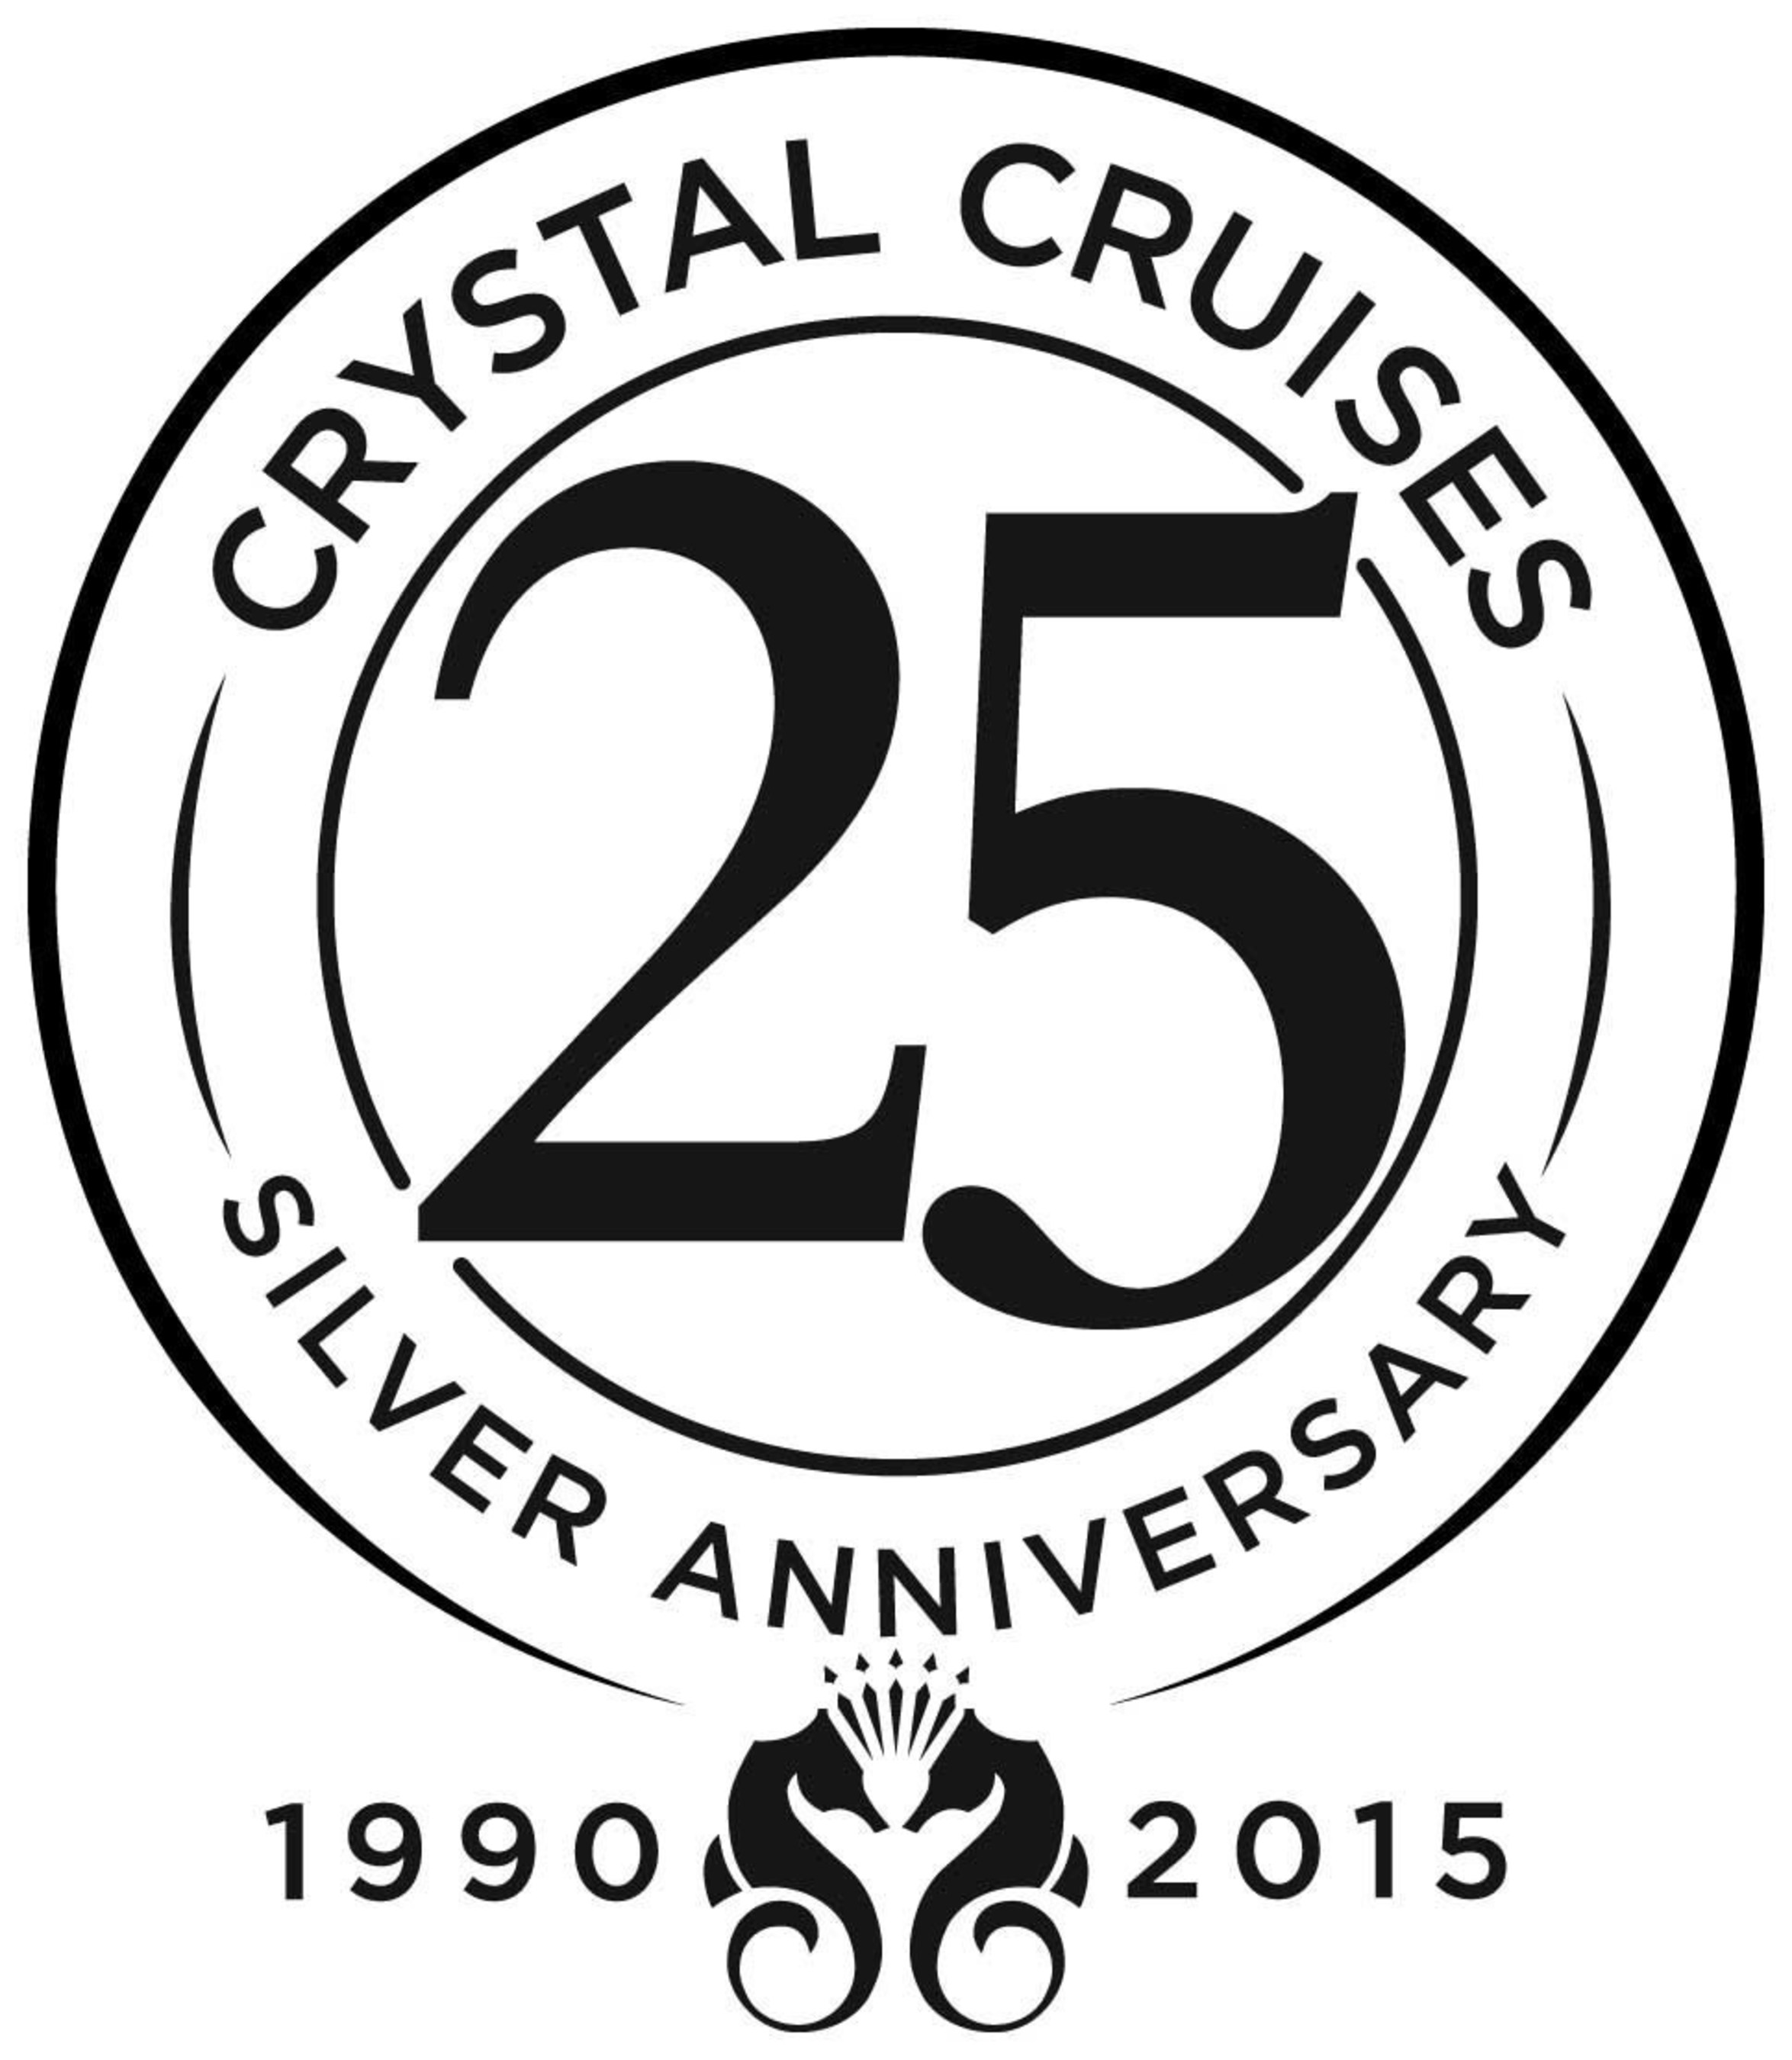 Crystal Cruises will be celebrating 25 years of sailing in 2015 with multiple theme cruises bringing back former Crystal captains, as well as current top executives